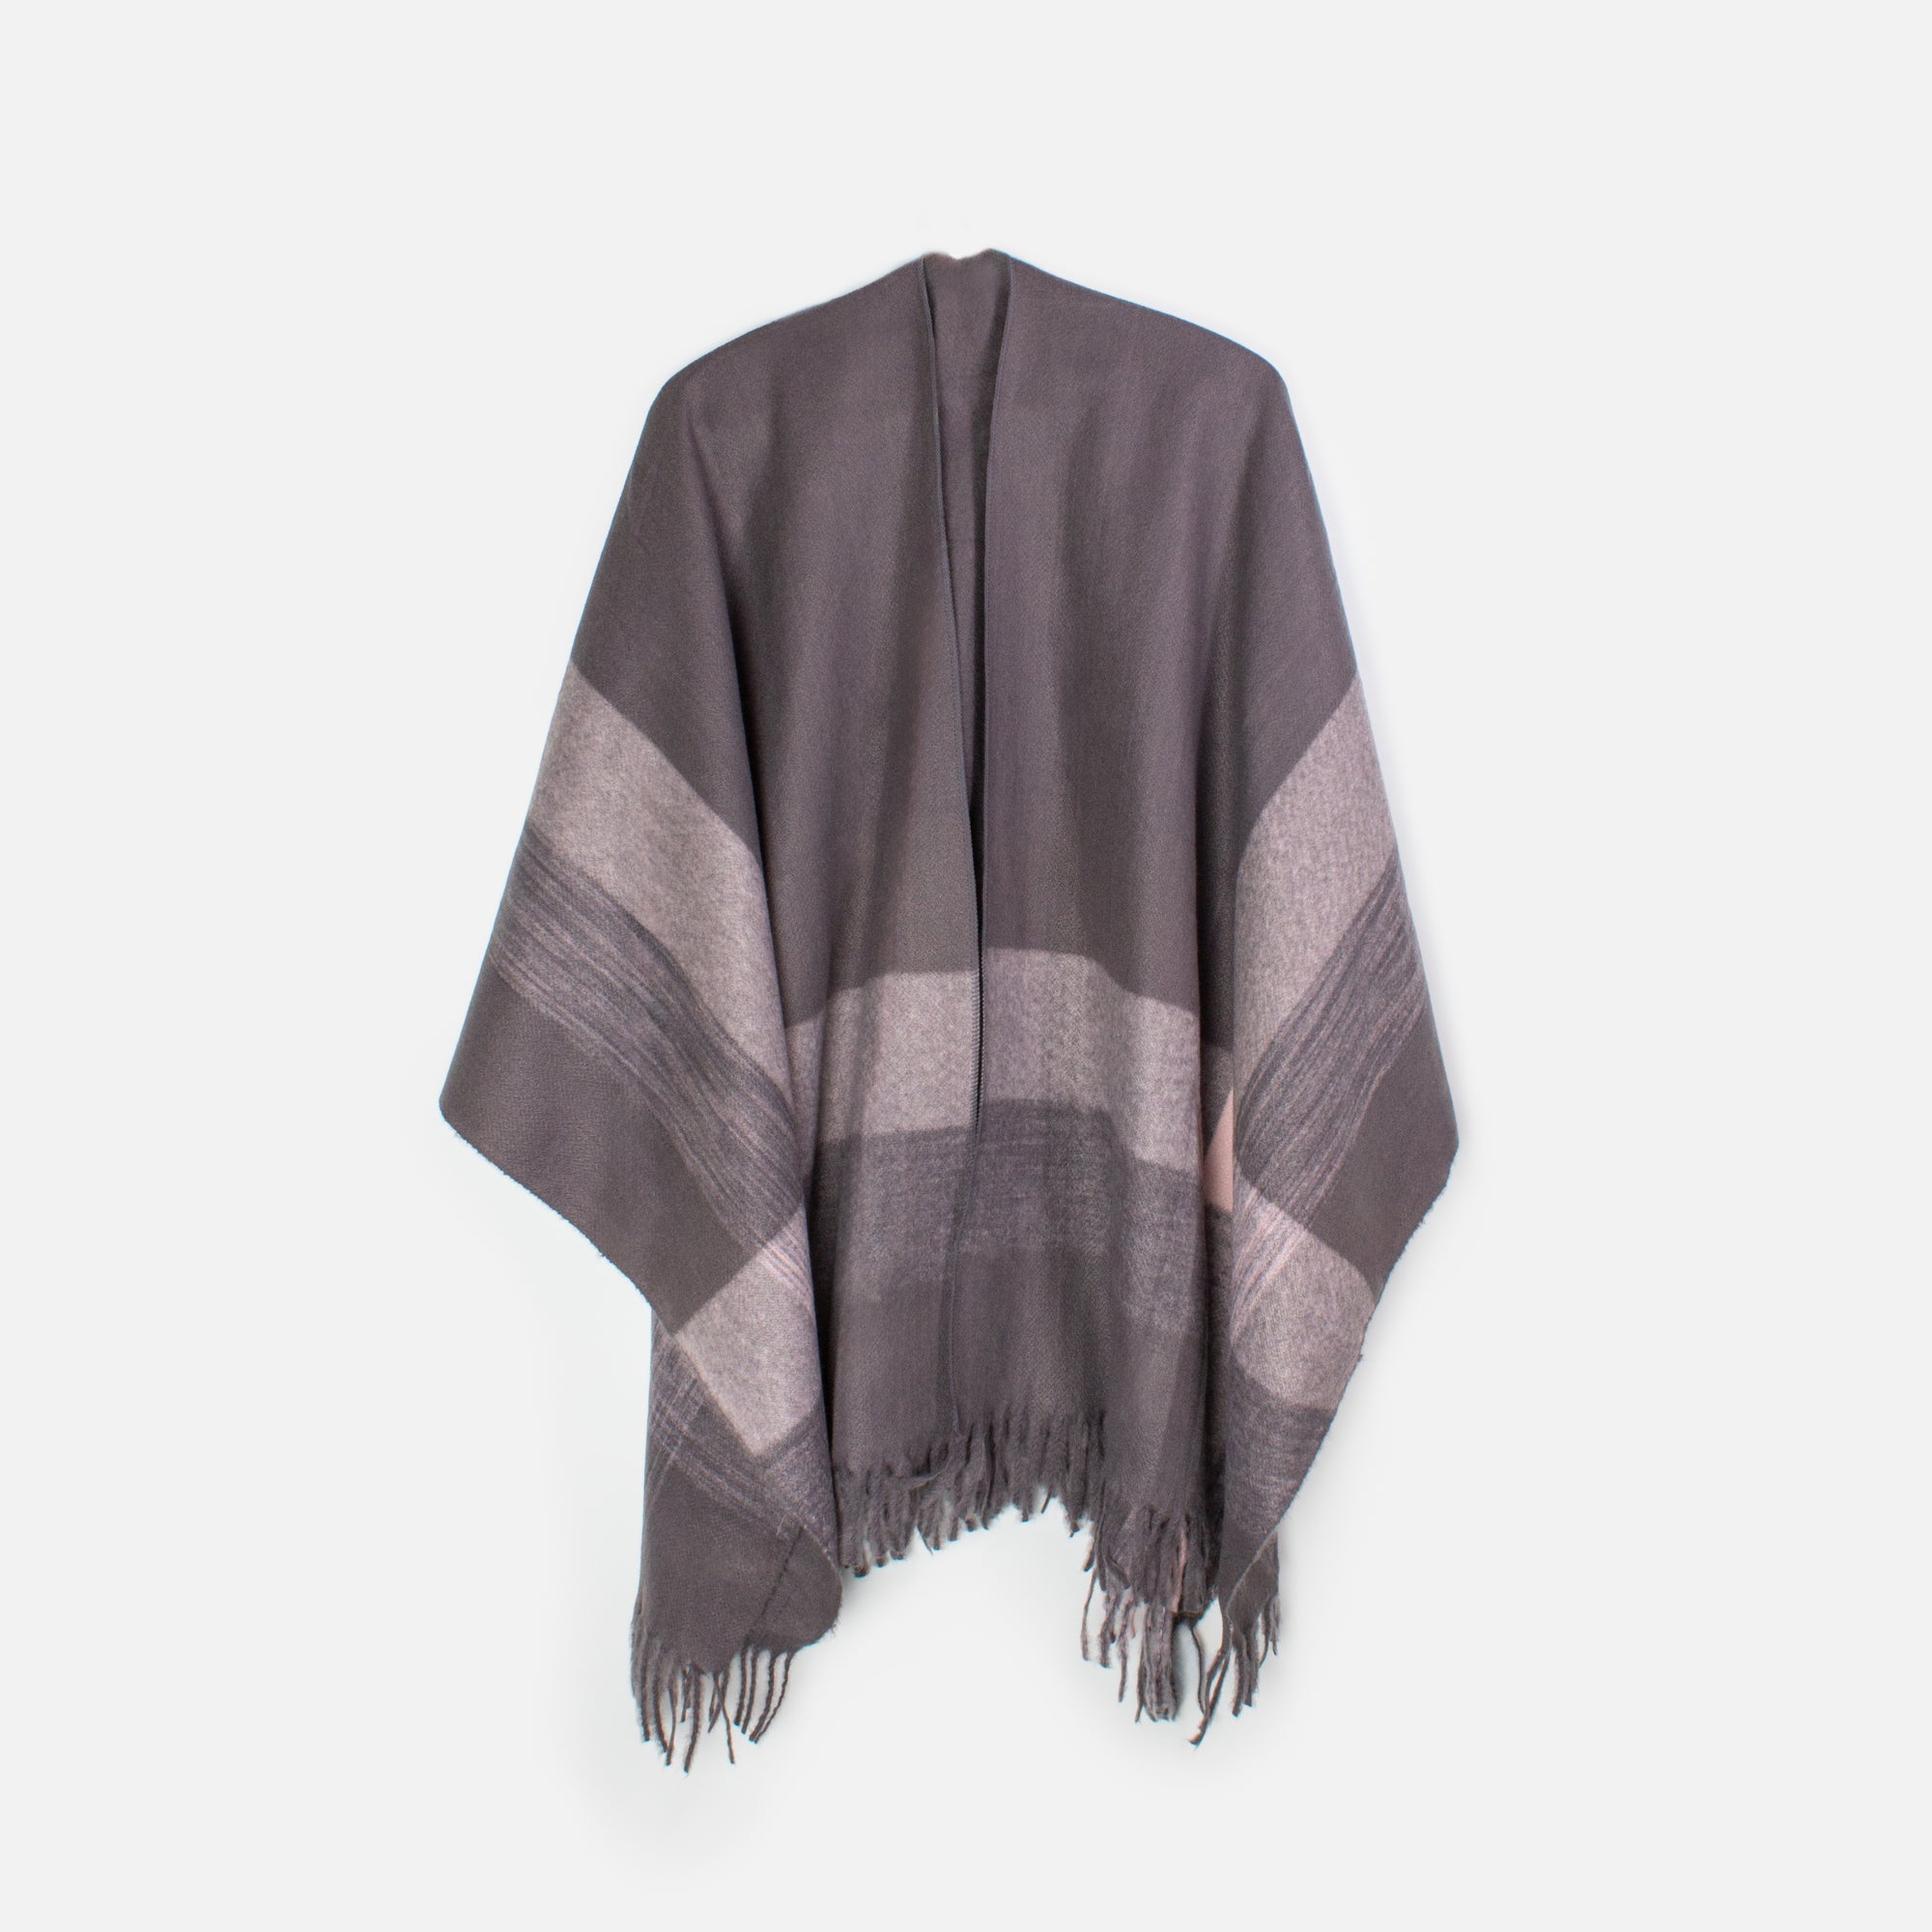 Gray poncho with wide bands and fringe